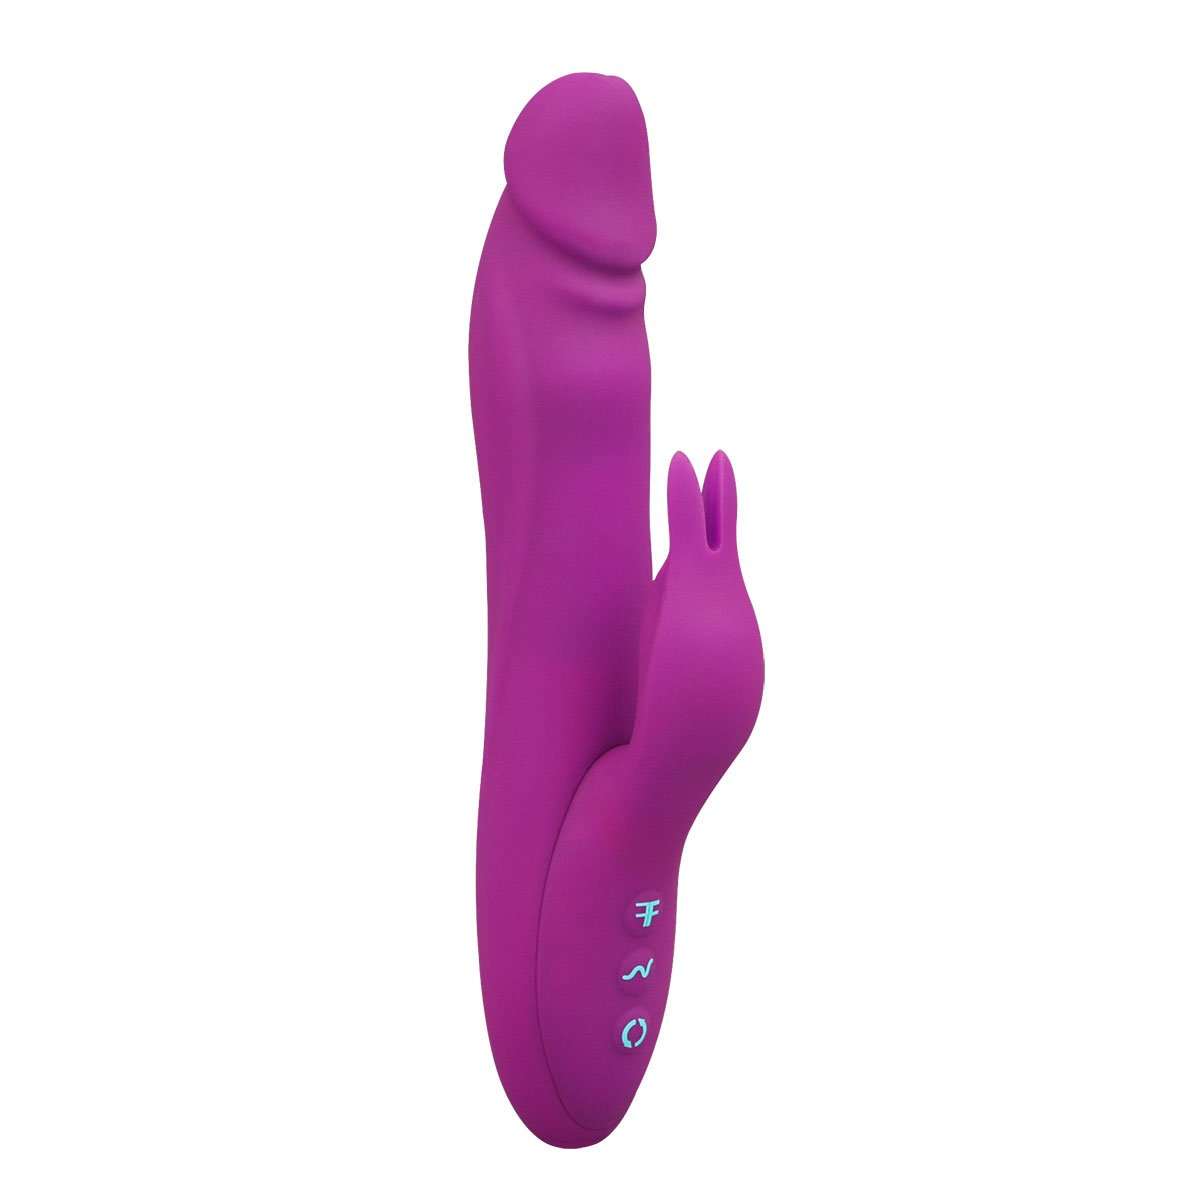 Femme Funn Booster Rabbit - Buy At Luxury Toy X - Free 3-Day Shipping